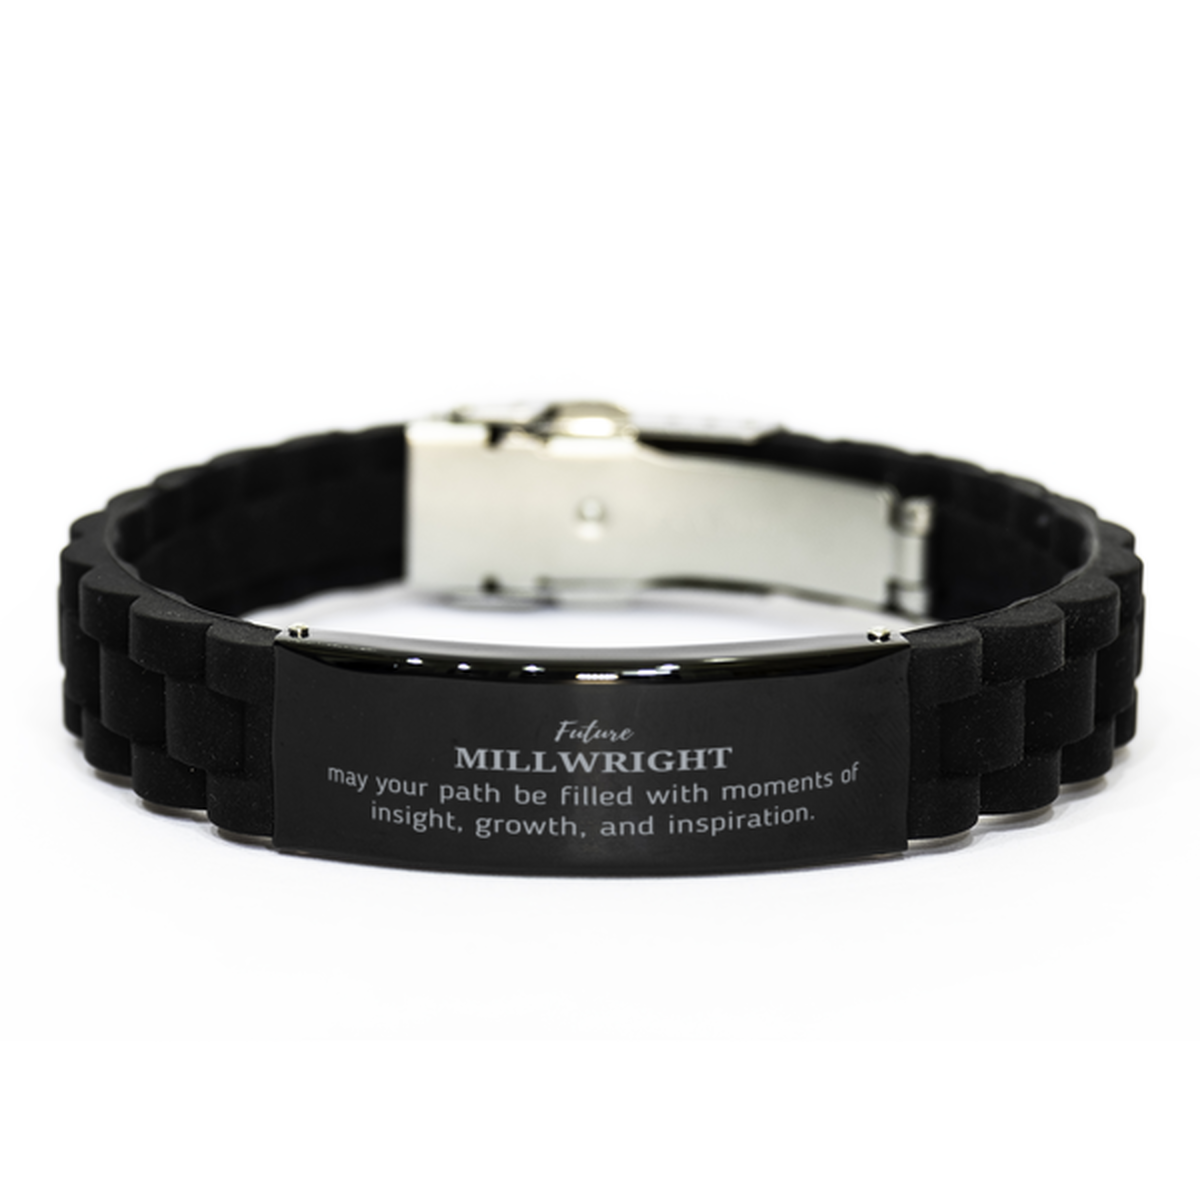 Future Millwright Gifts, May your path be filled with moments of insight, Graduation Gifts for New Millwright, Christmas Unique Black Glidelock Clasp Bracelet For Men, Women, Friends